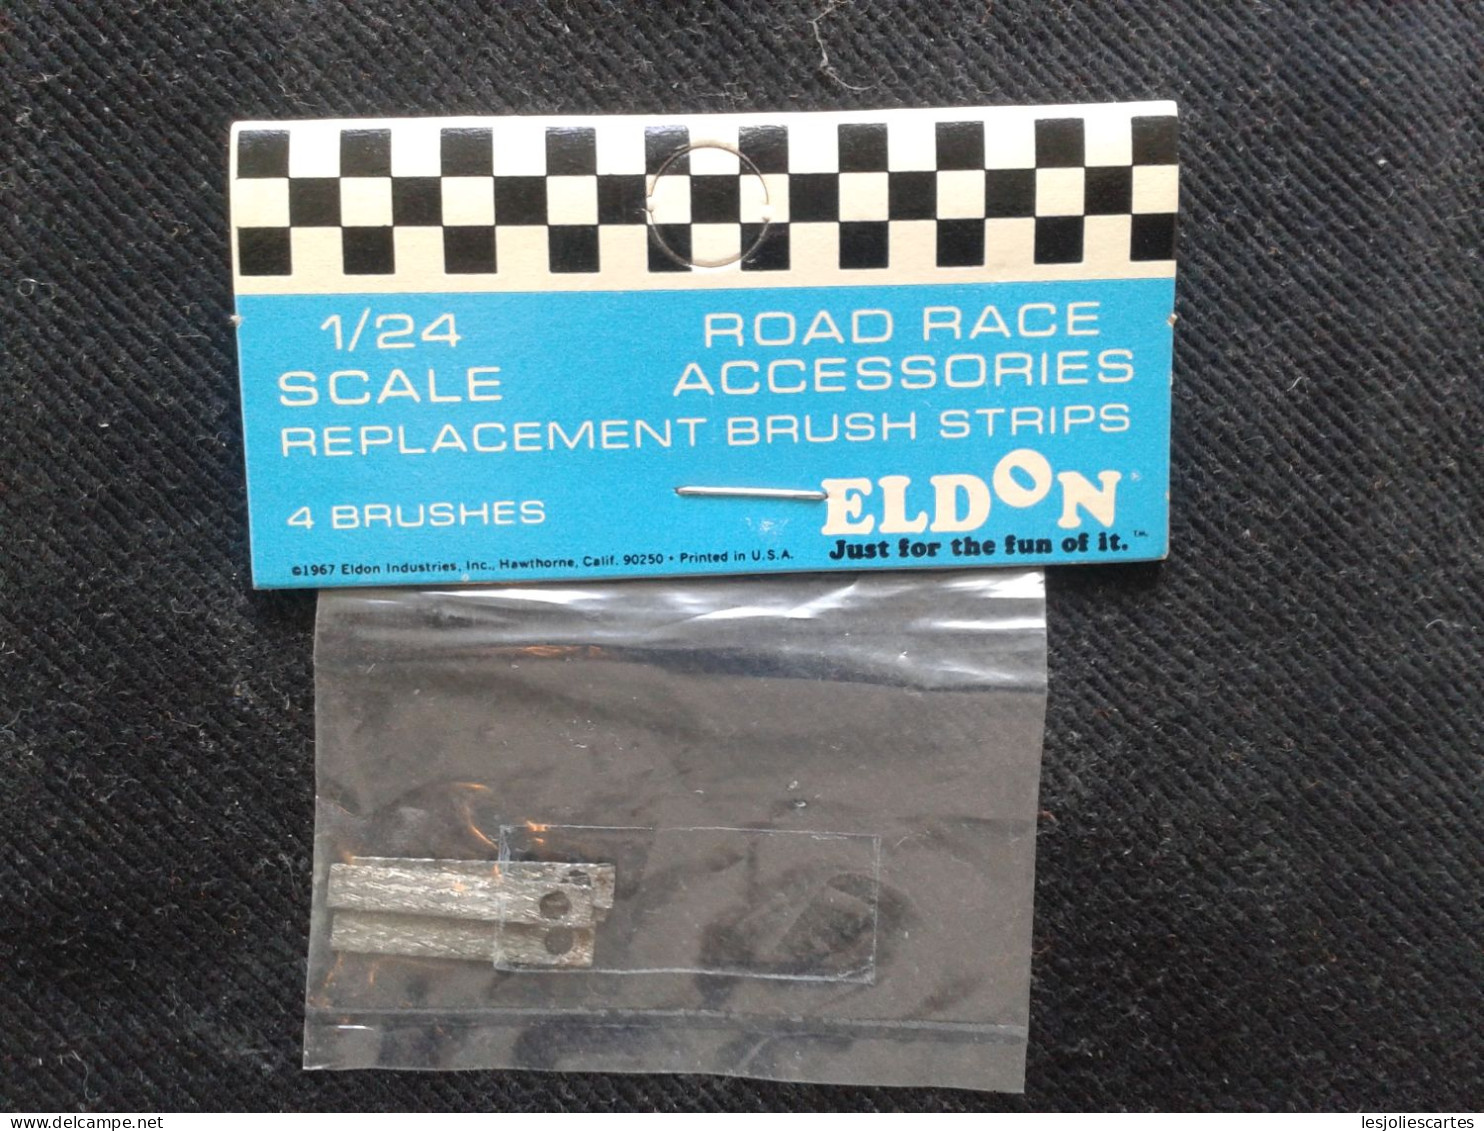 Eldon Replacement Brush Strips Road Race Accessories 1/24 - Road Racing Sets